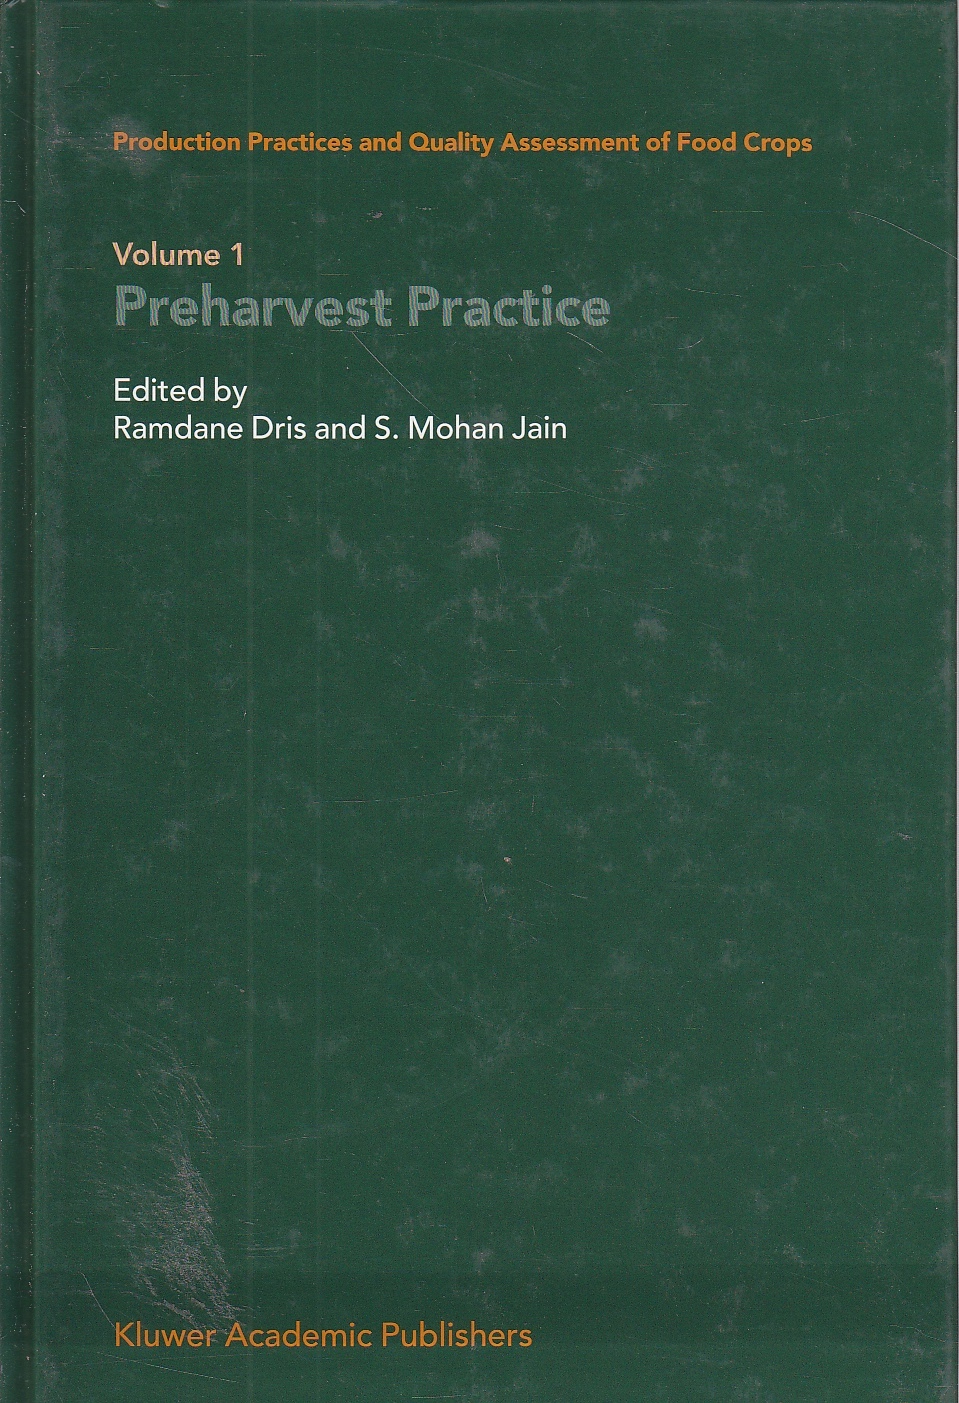 Image for Production Practices and Quality Assessment of Food Crops Volume 1 Preharvest Practice